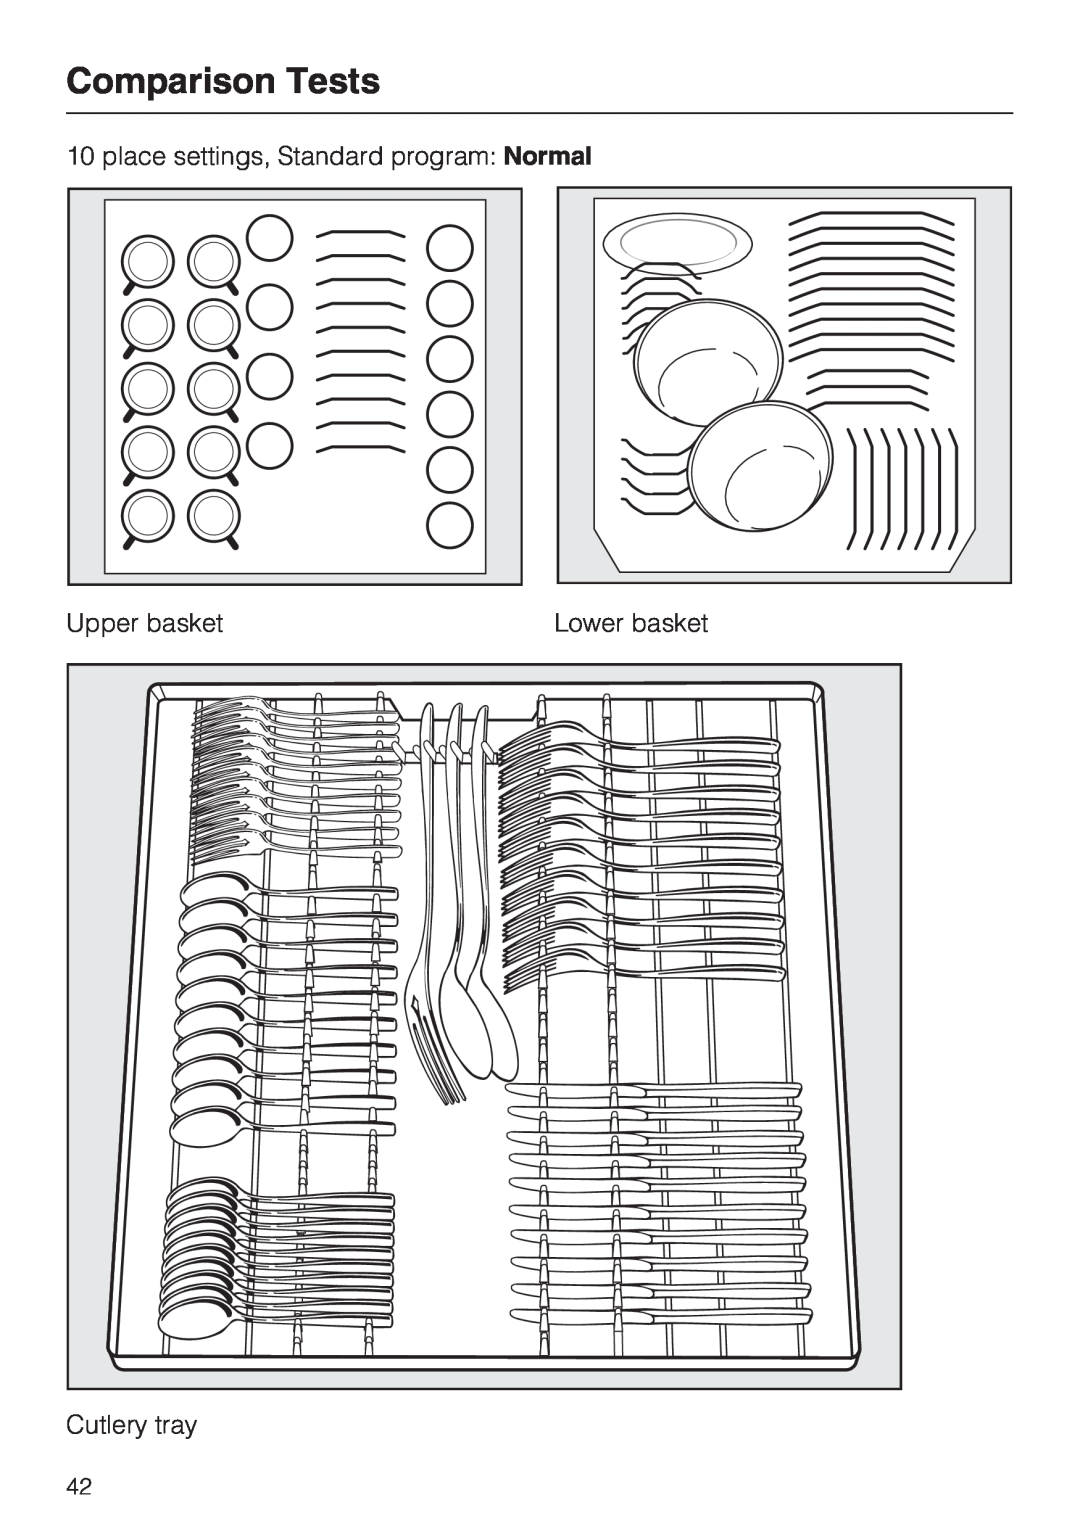 Miele G 2432 manual Comparison Tests, place settings, Standard program: Normal, Upper basket, Lower basket, Cutlery tray 